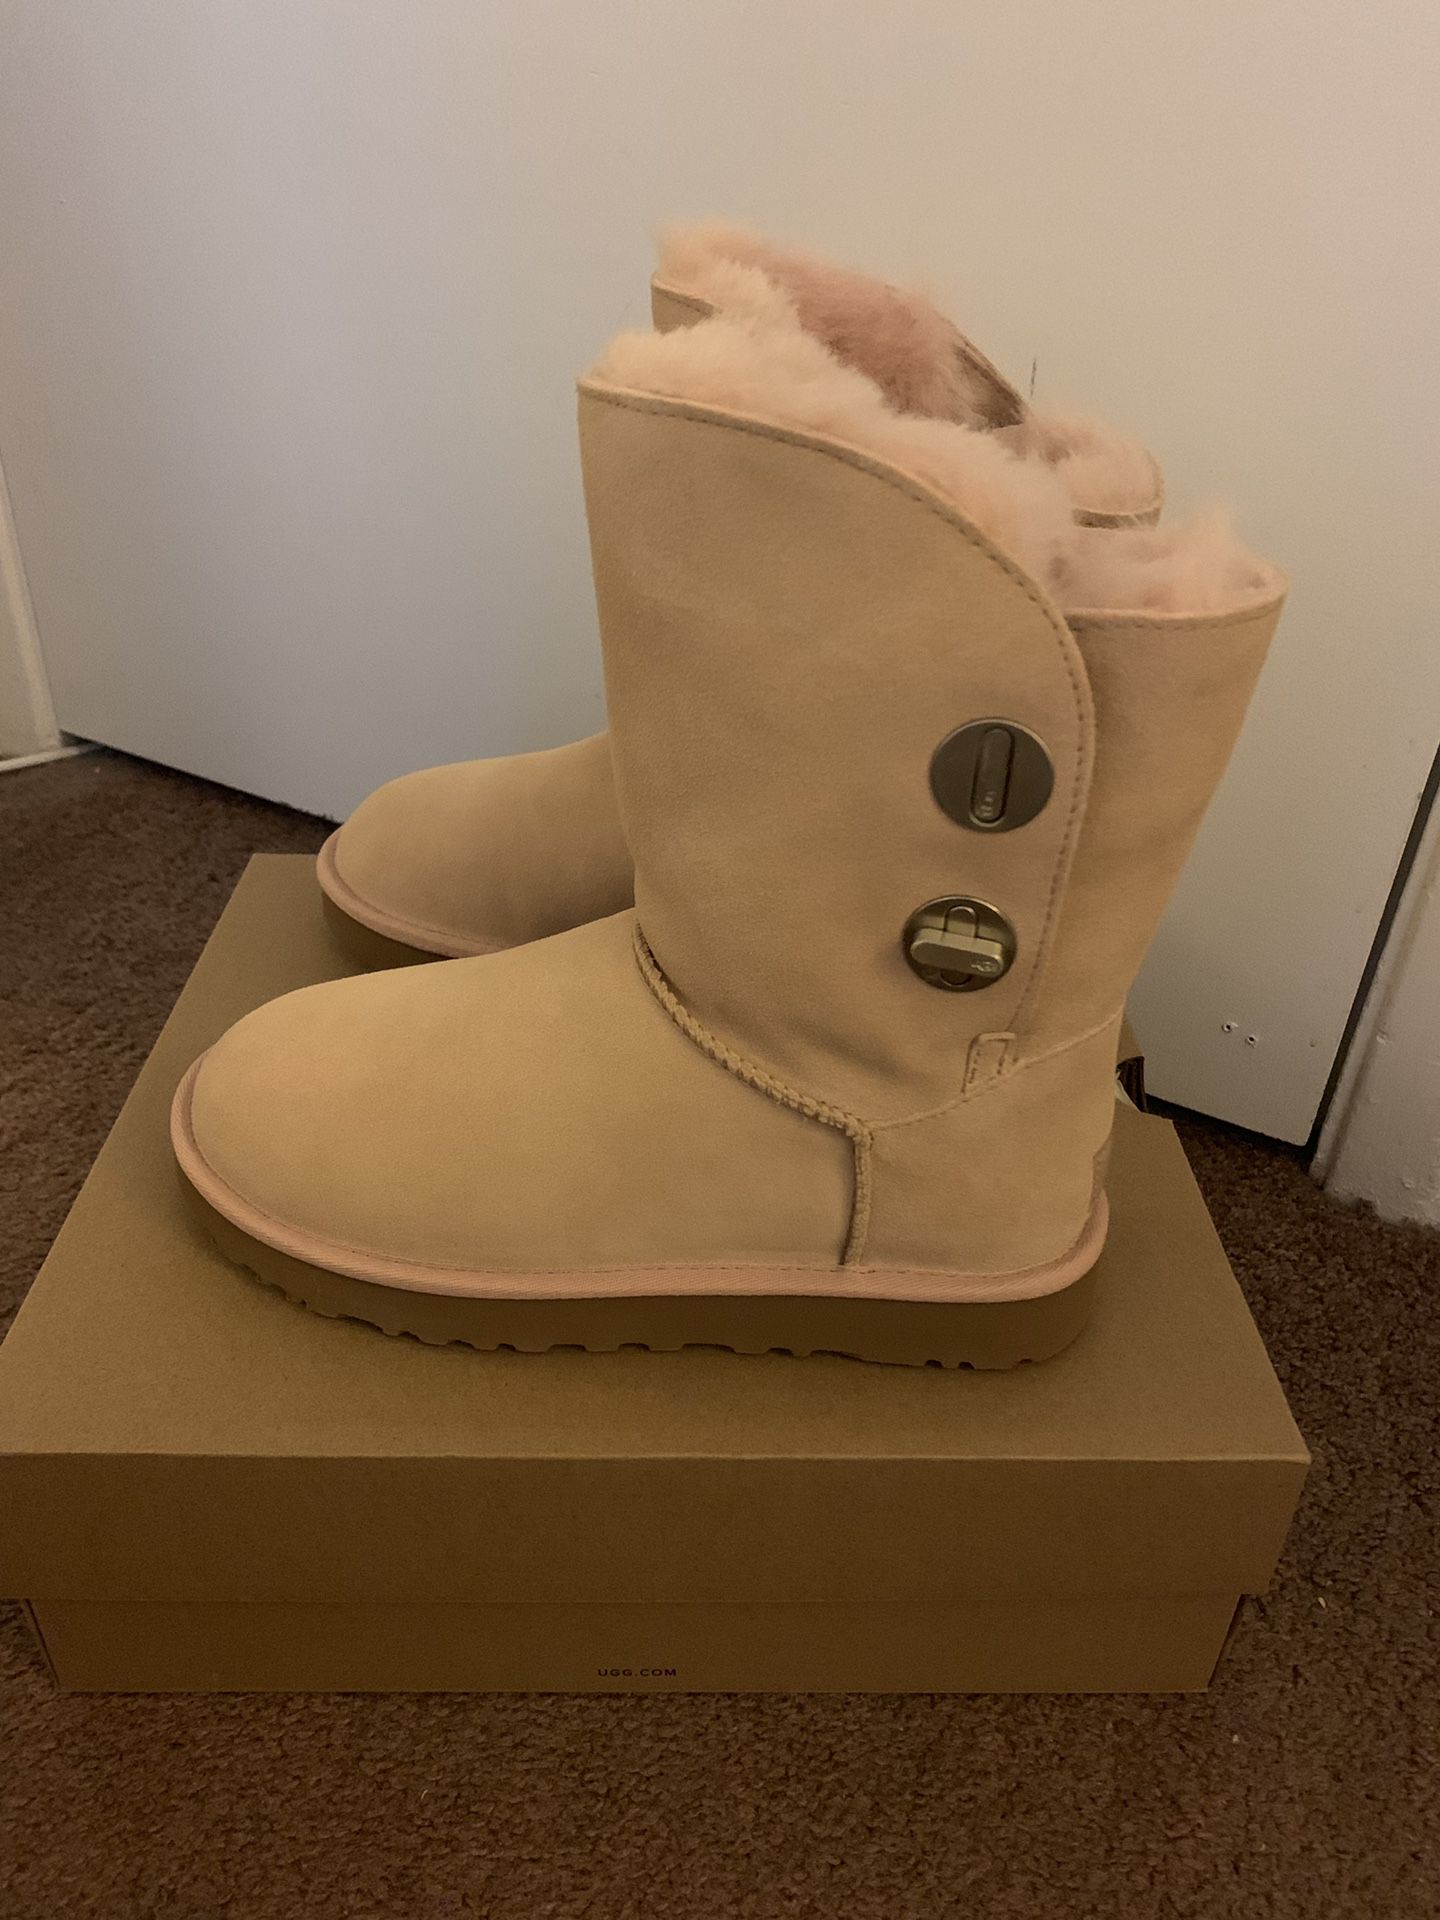 100% Authentic Brand New in Box UGG Turnlock Wool Lined Boots / Women size 7 and women size 8 / Color: Amber